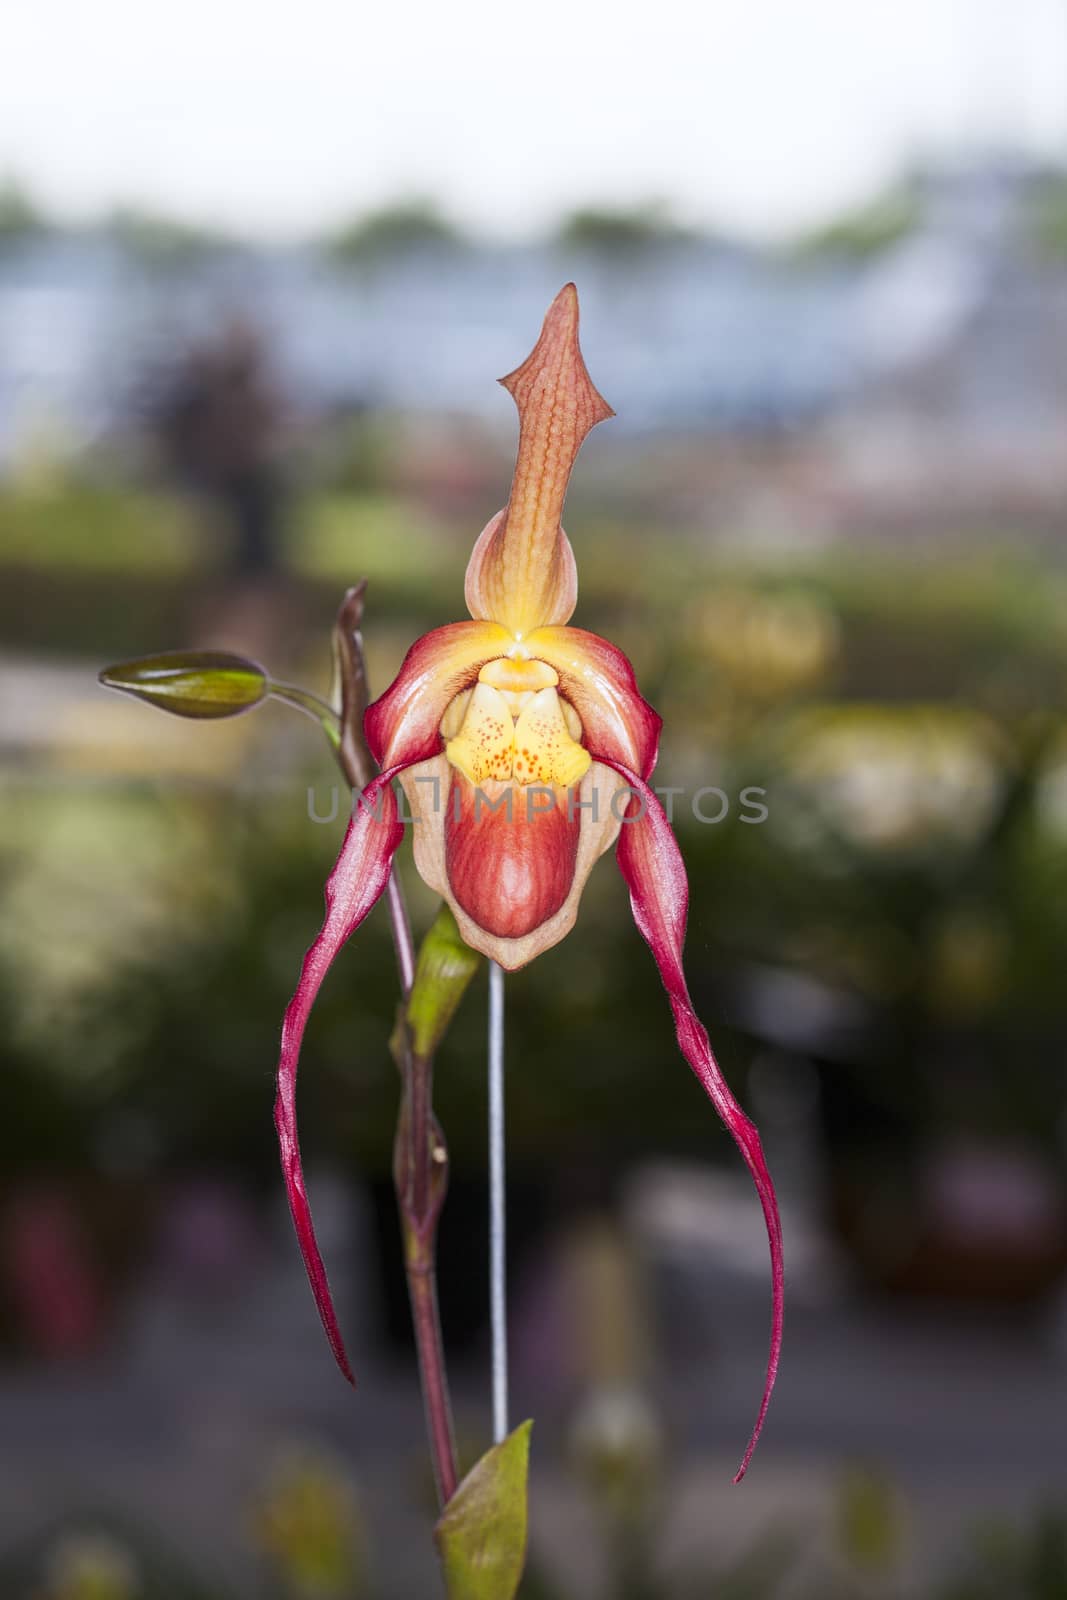 Paphiopedilum orchid or Lady's Slipper orchid. by jee1999